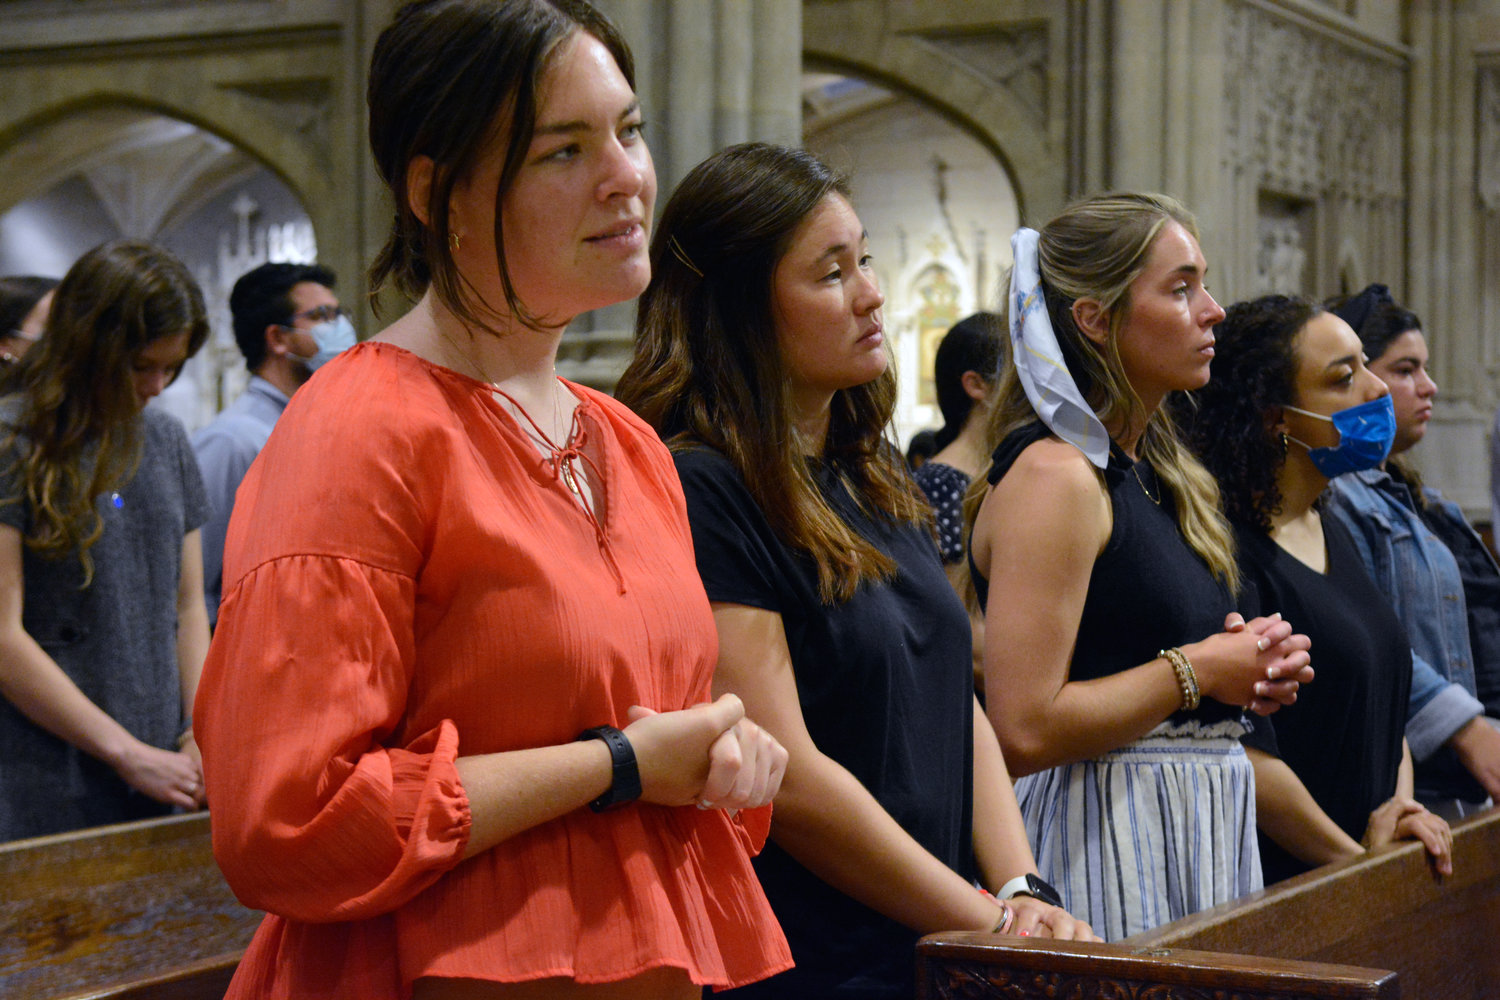 Young adults gather Aug. 4 at St. Patrick’s Cathedral in Manhattan for the monthly Young Adult Mass sponsored by the archdiocesan Office of Young Adult Outreach.